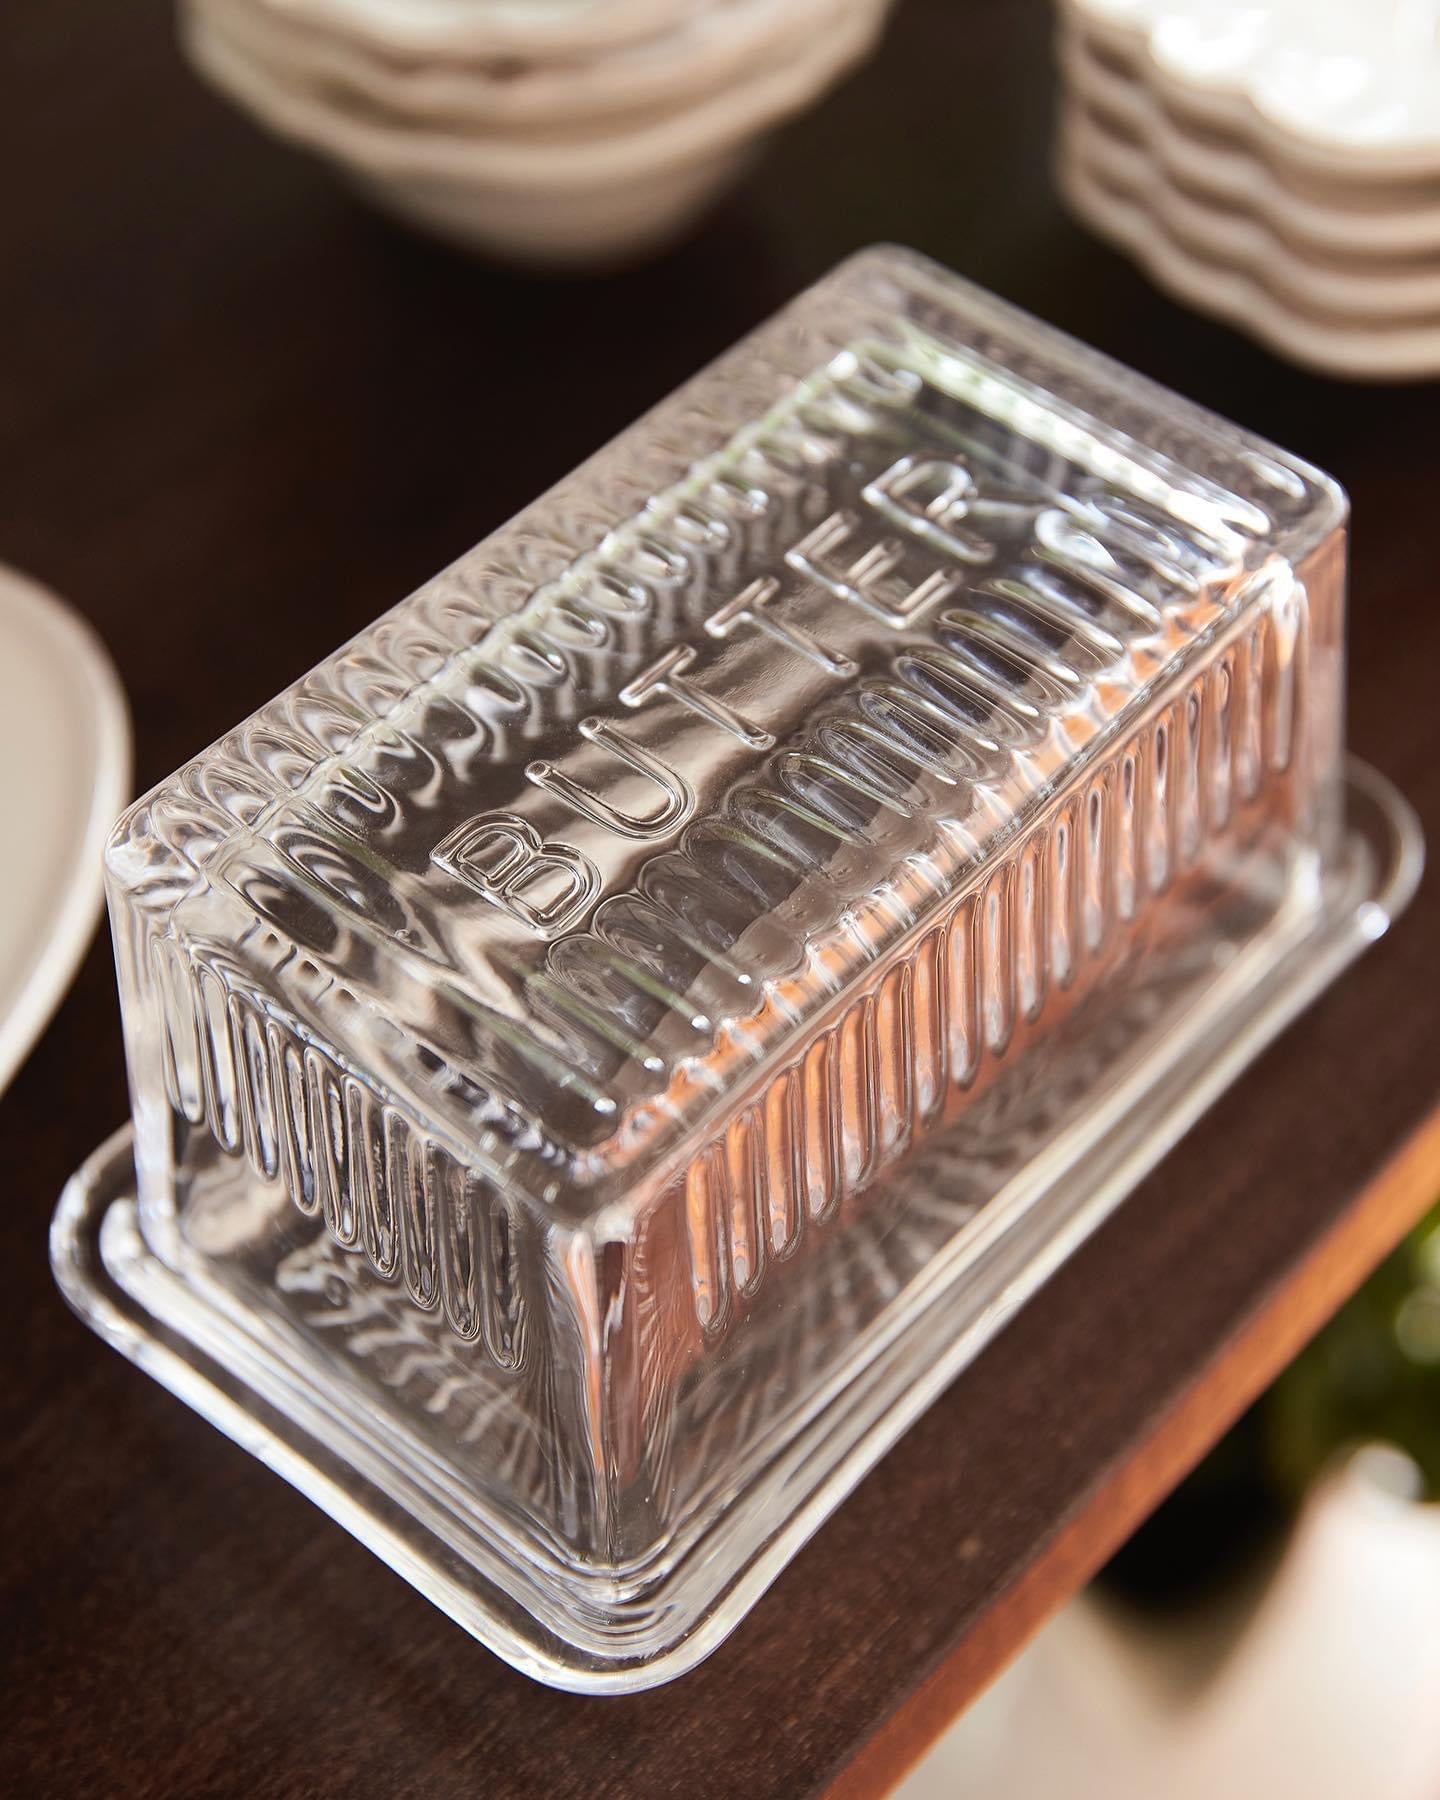 Clear Glass Butter Dish | French Country | Avisons NZ